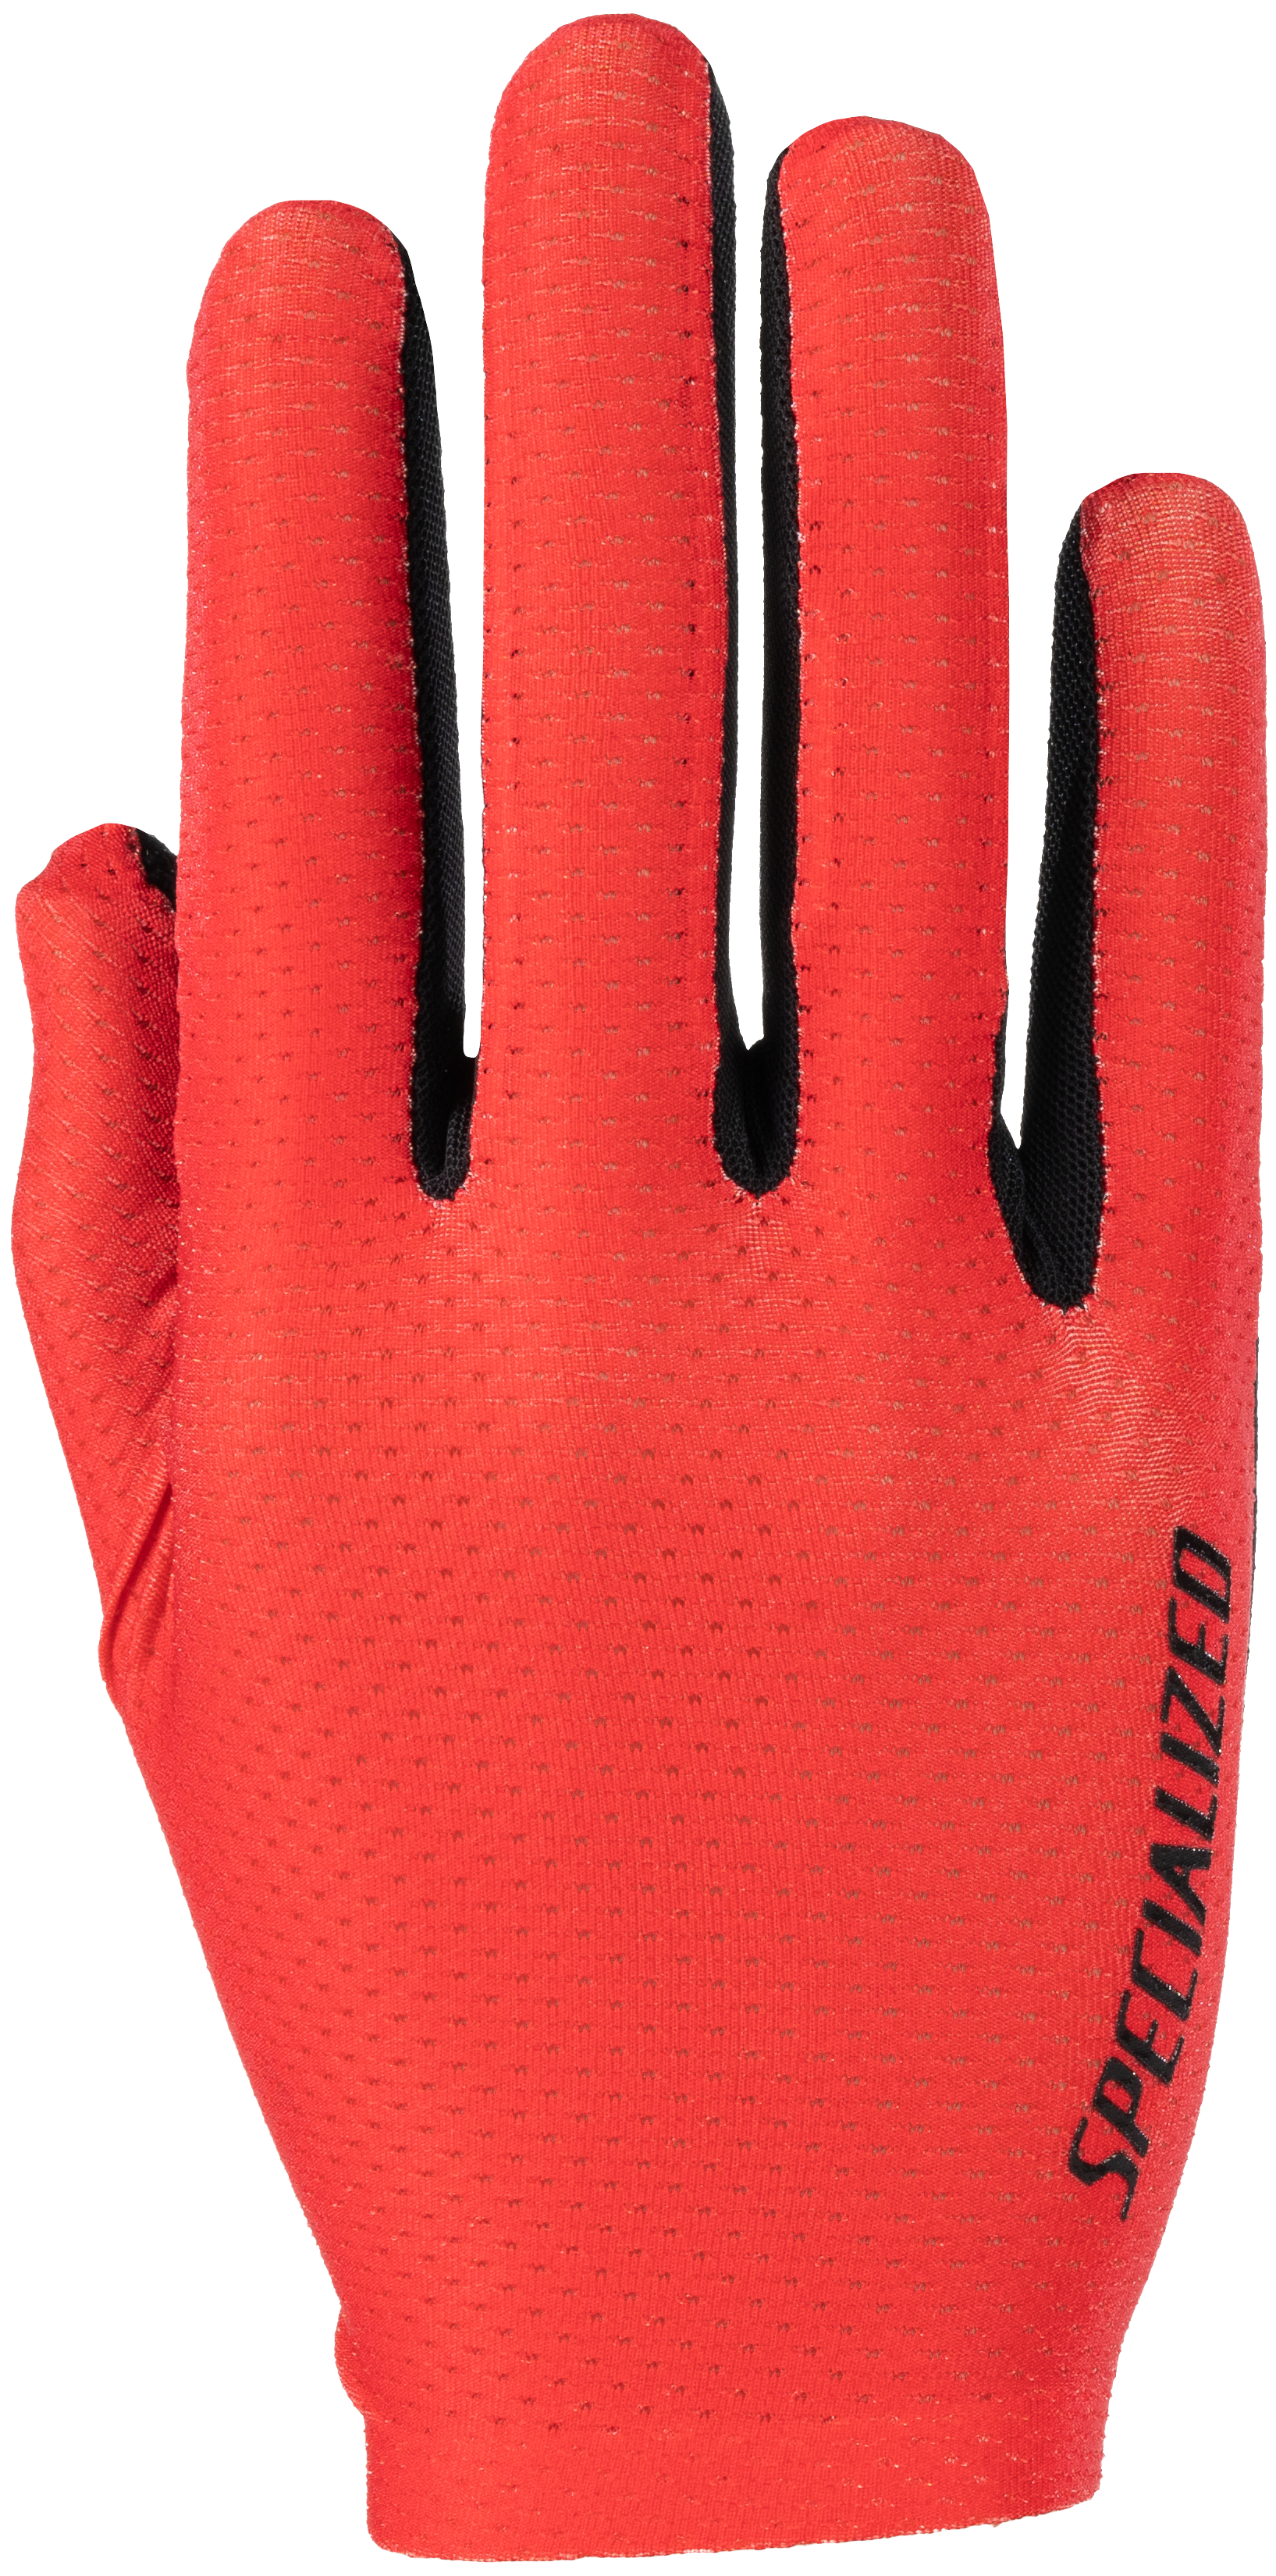 Guantes Ciclismo Specialized - KBIKE